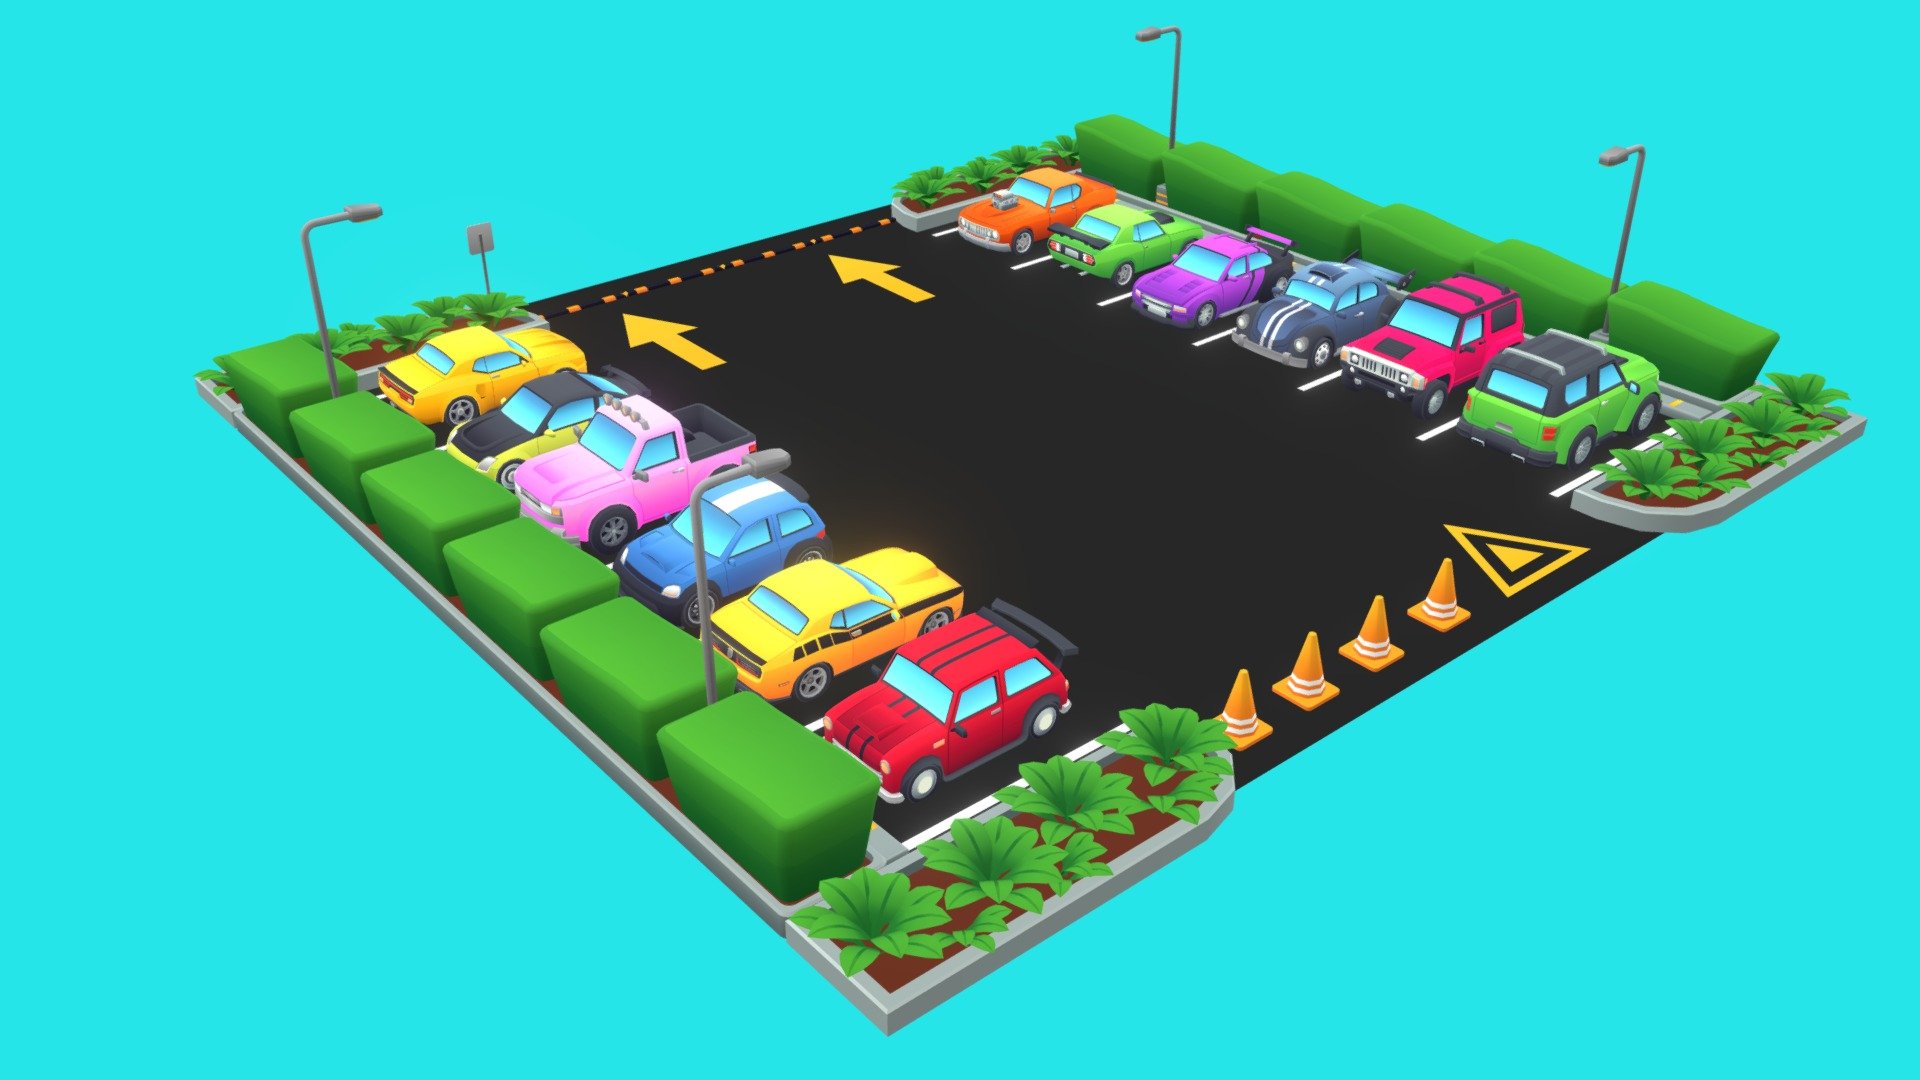 Ready to step on the accelerator, lowpoly vehicle package
You can try a small demo at: https://quesillostudios.itch.io/drive-club-cars


Details

-12 vehicles with their color variations

-2 Material (Texture Atlas 1024* 1024)

-Assest extra included (the ones used in this presentation and in the demo track)

-FBX and OBJ files included

-Blend files included 

-Unity packaging (prefabs, materials and shader)

(Note: The driver for the vehicles used in the demo is not included in the package, we are working on a driver of our own to integrate it in future updates) - Drive Club Cars Pack - Buy Royalty Free 3D model by Ergoni 3d model